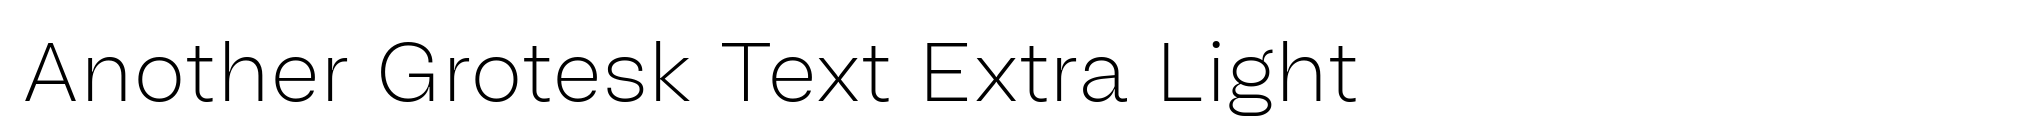 Another Grotesk Text Extra Light image